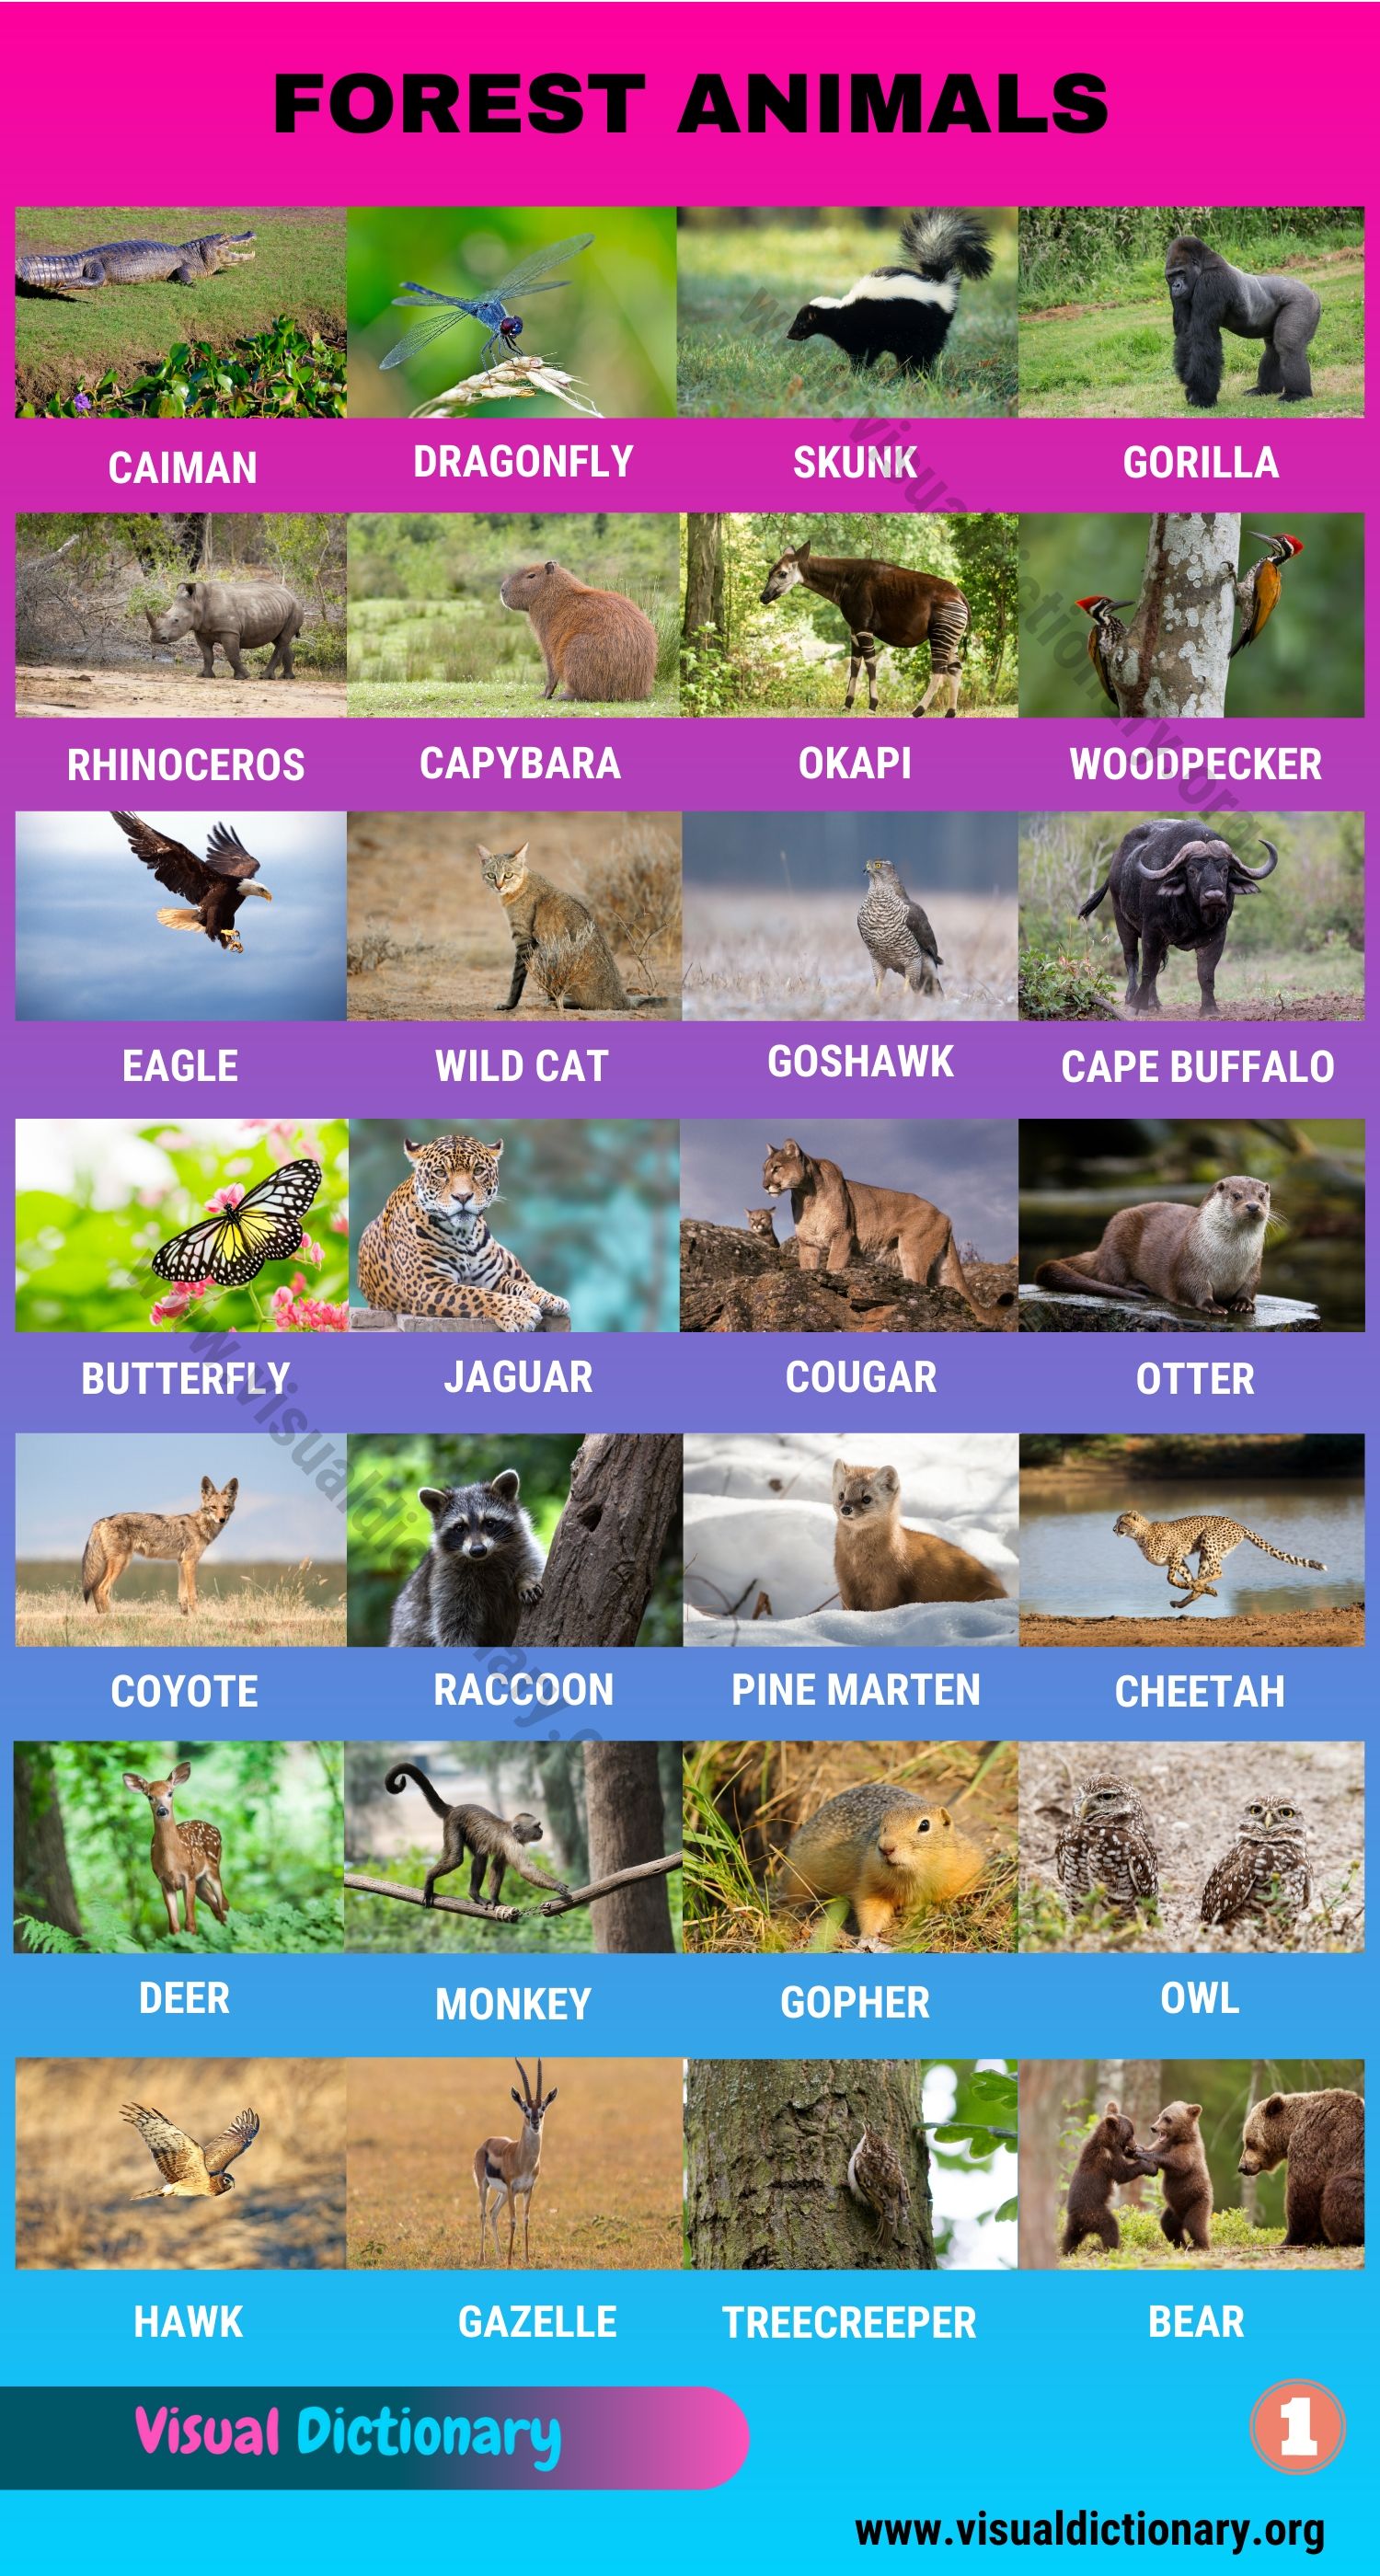 Forest Animals: Helpful List of 55 Different Animals Living in the Forest -  Visual Dictionary